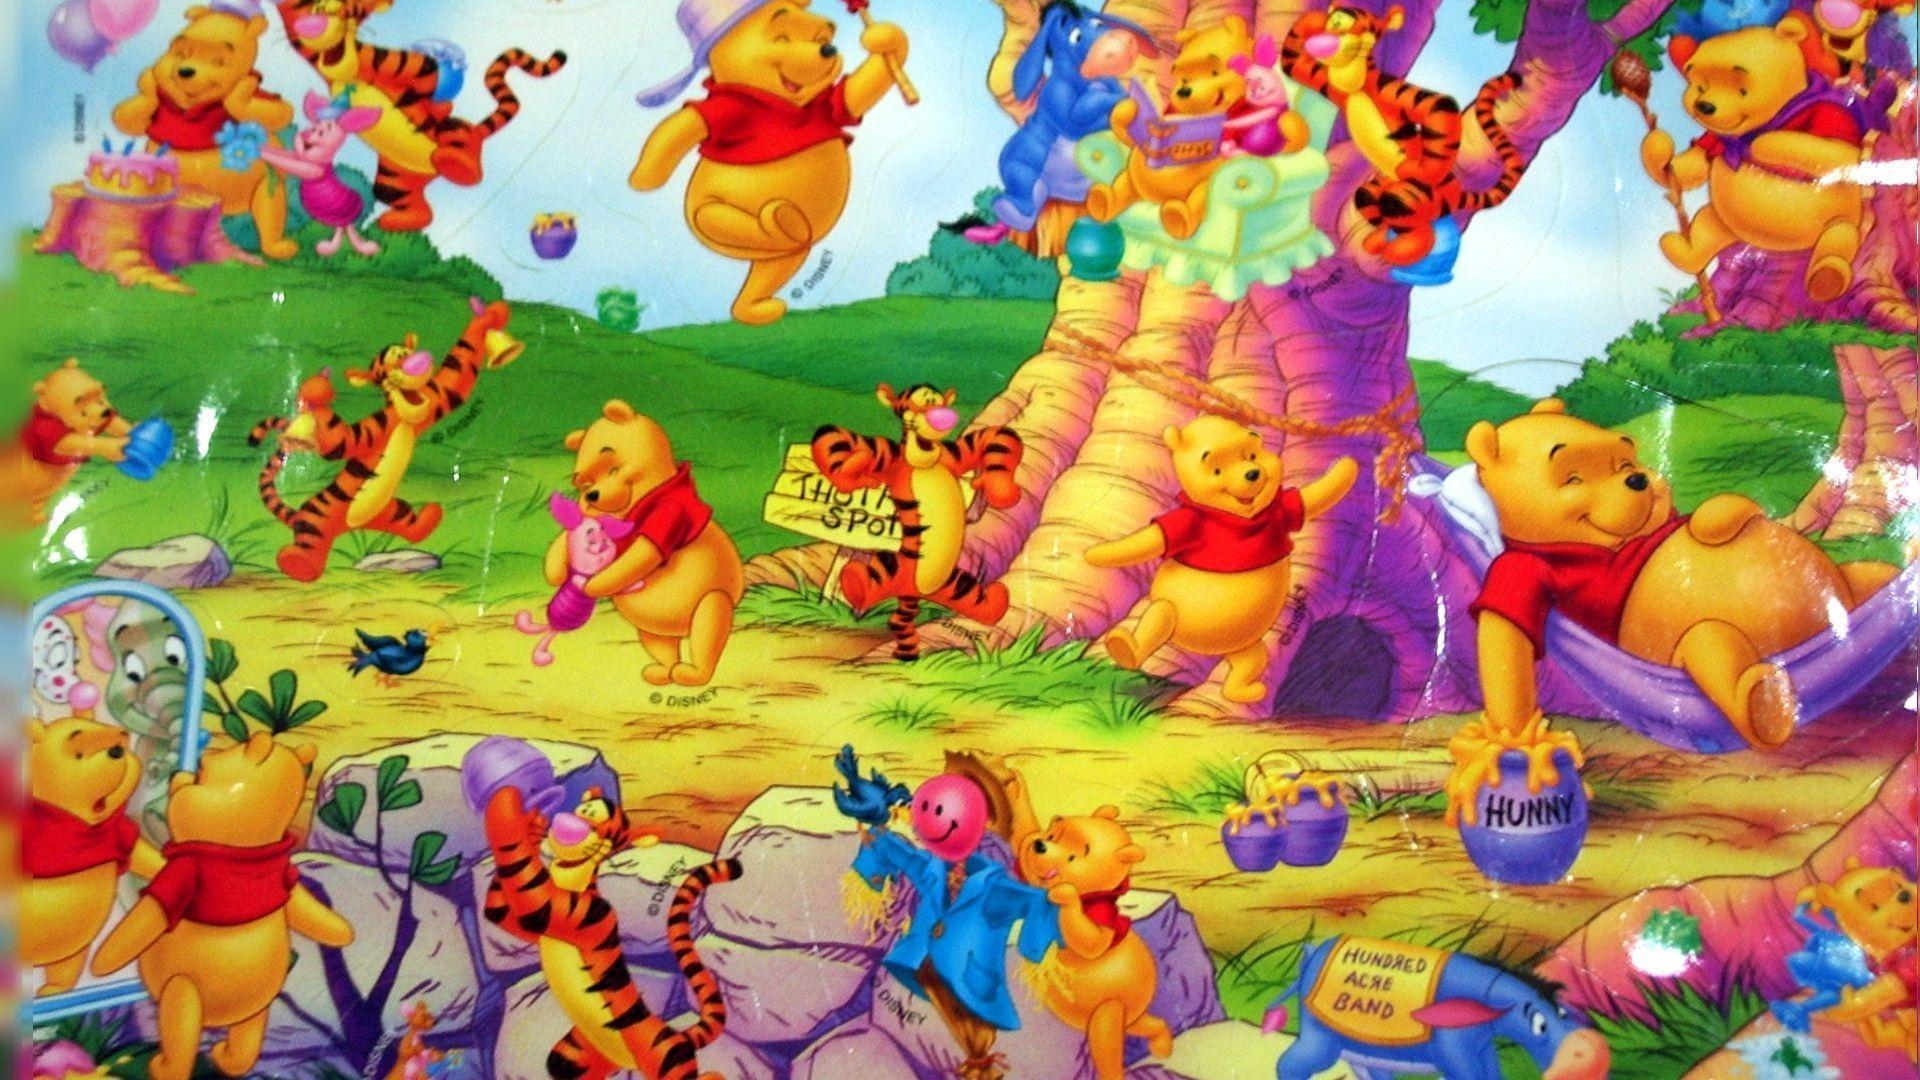 Winnie The Pooh Character Wallpapers Desktop 1920x1080PX